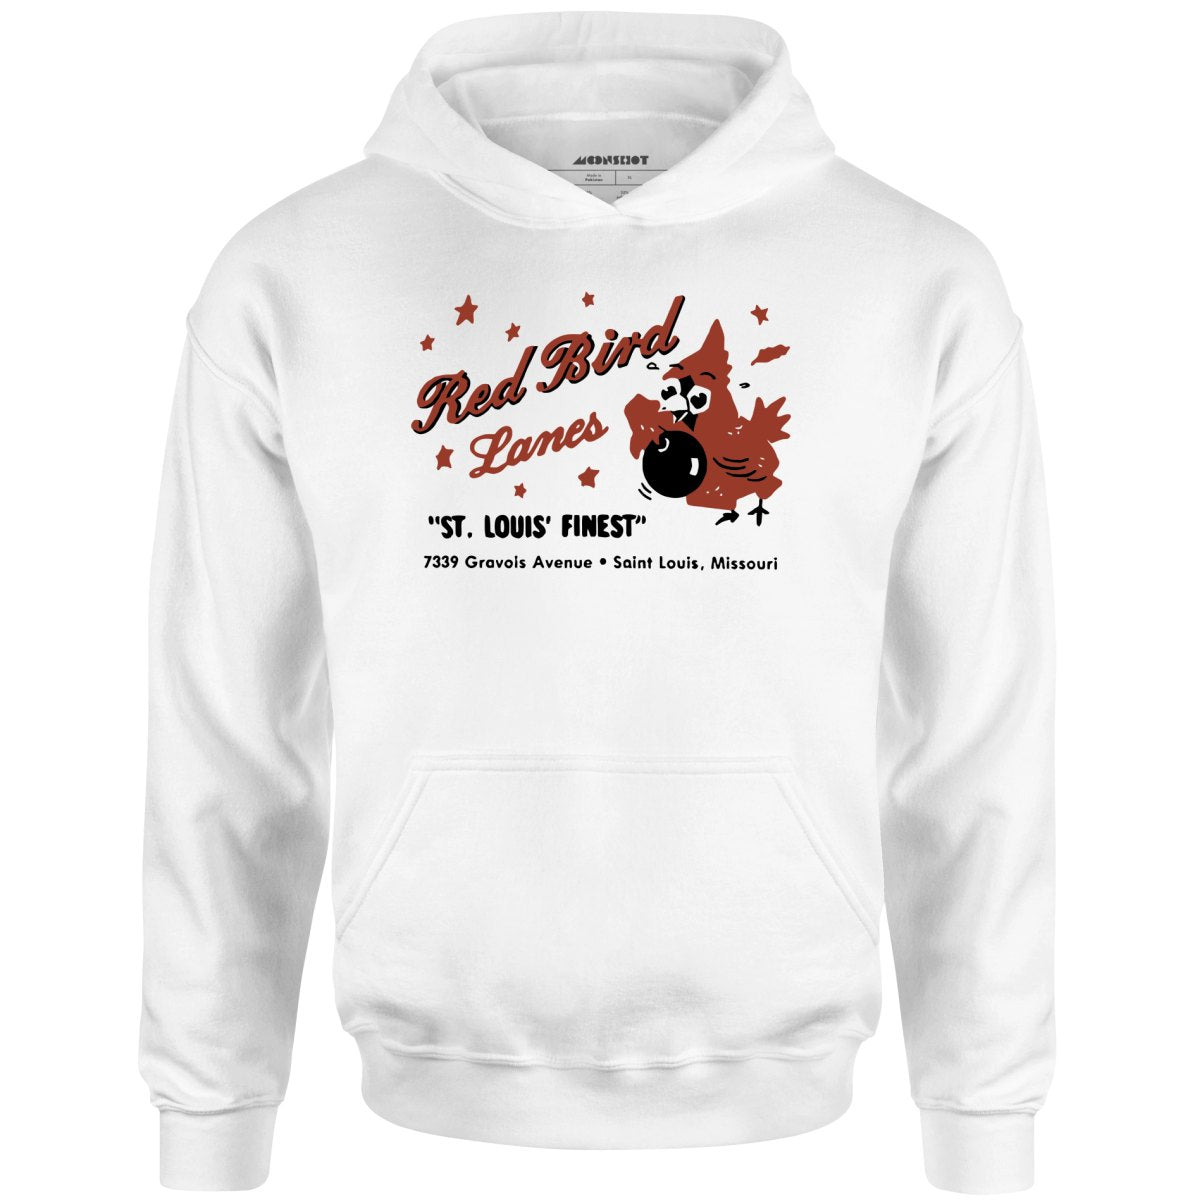 Red Bird Lanes v1 - St. Louis, MO - Vintage Bowling Alley - Unisex Hoodie